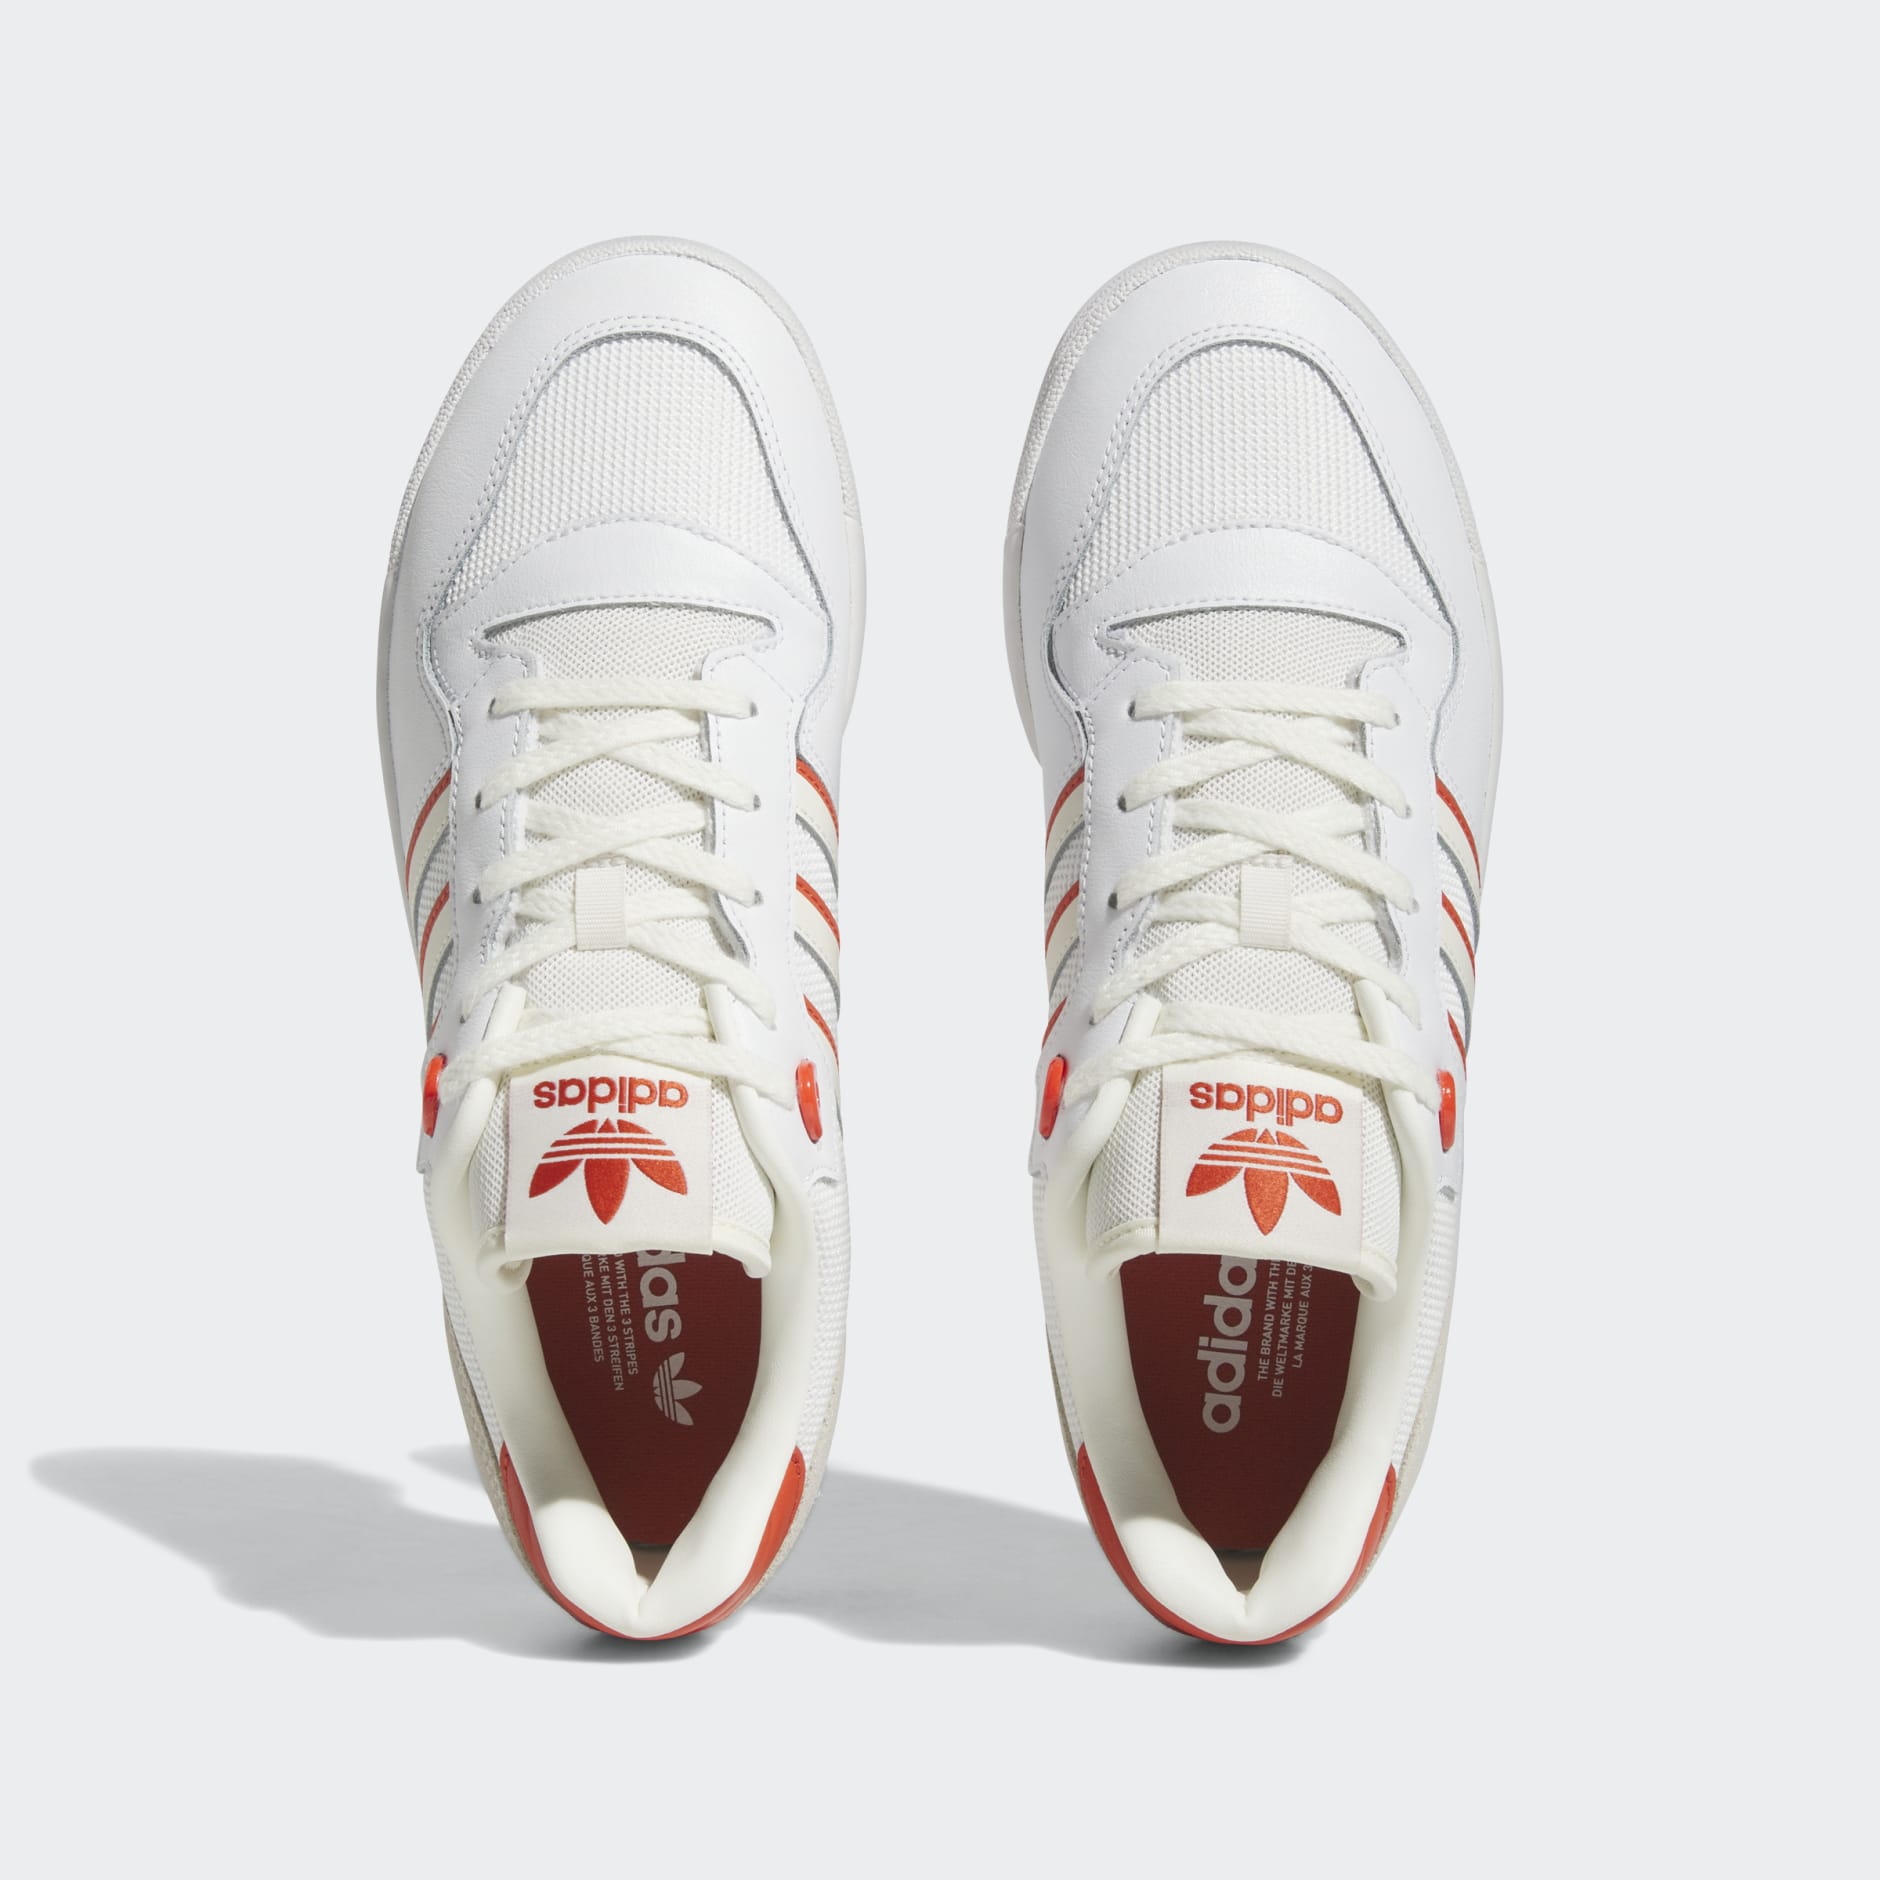 Men's Shoes - Rivalry Low Shoes - White | adidas Egypt